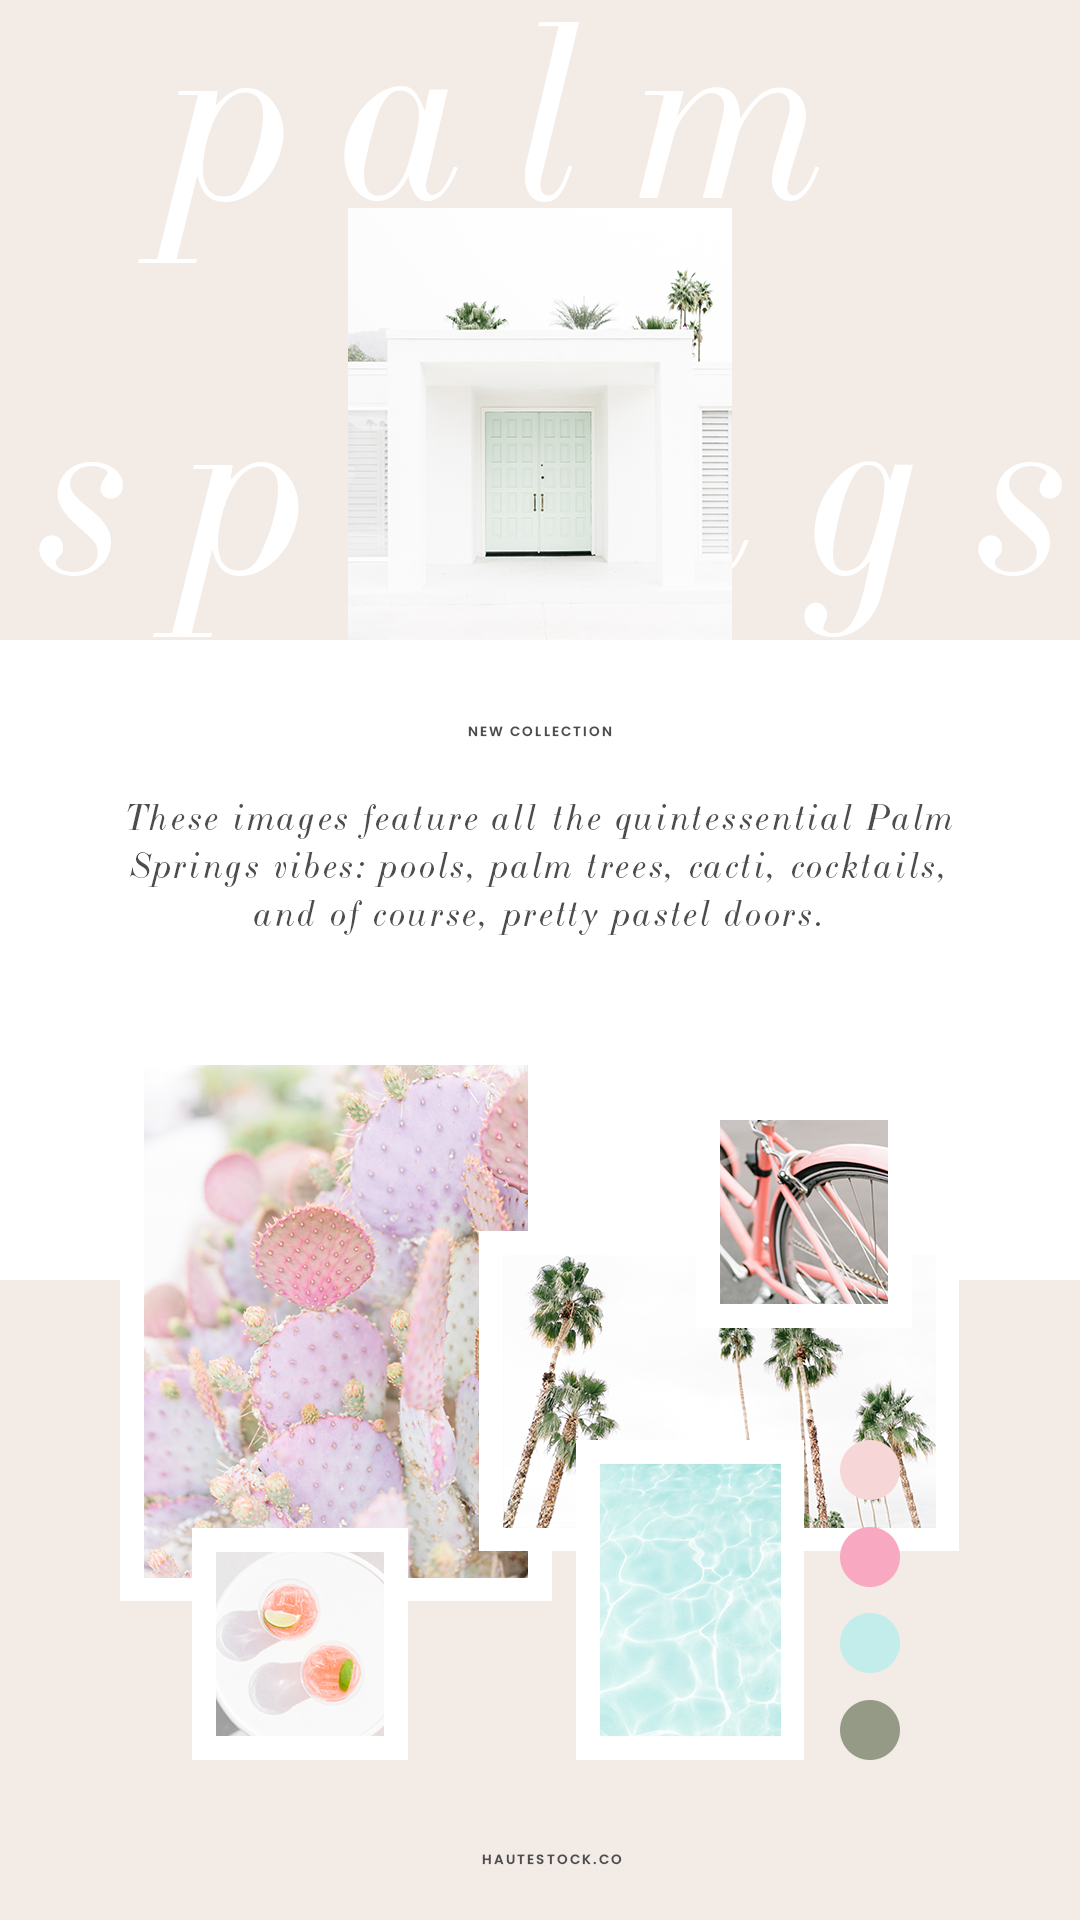 Palm Springs travel stock photos from Haute Stock. These images feature all the quintessential Palm Springs vibes: pools, palm trees, cacti, cocktails and of course, mid-century modern design. Click for a full preview of the Palm Springs Collection …